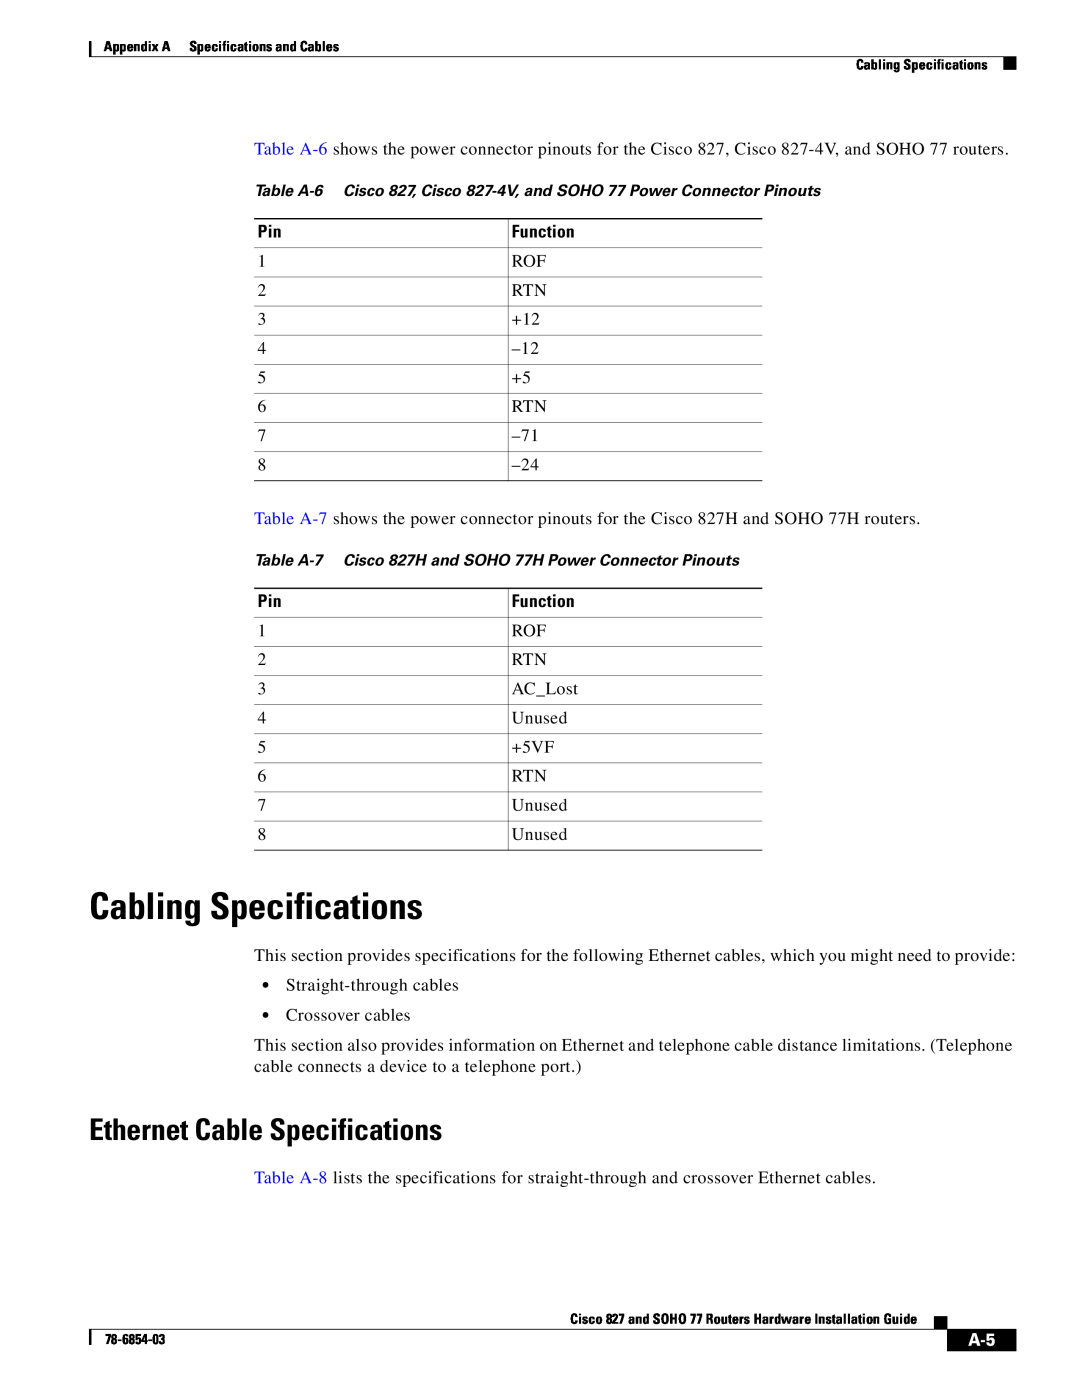 Cisco Systems SOHO 77 manual Cabling Specifications, Ethernet Cable Specifications 